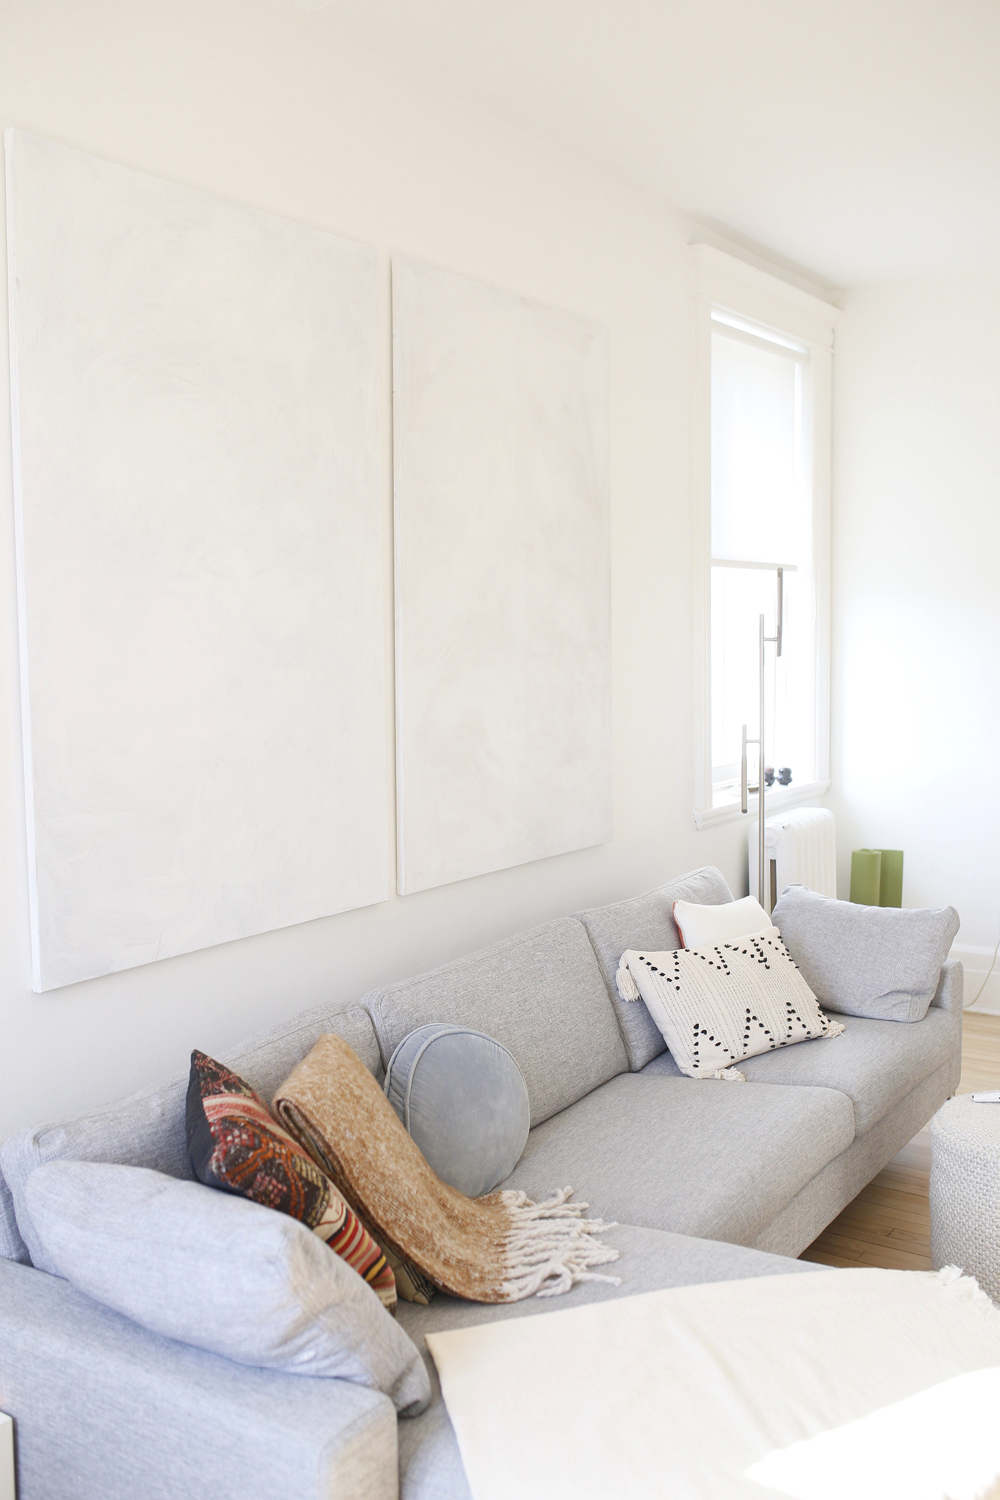 grey sectional, two pieces of white wall art